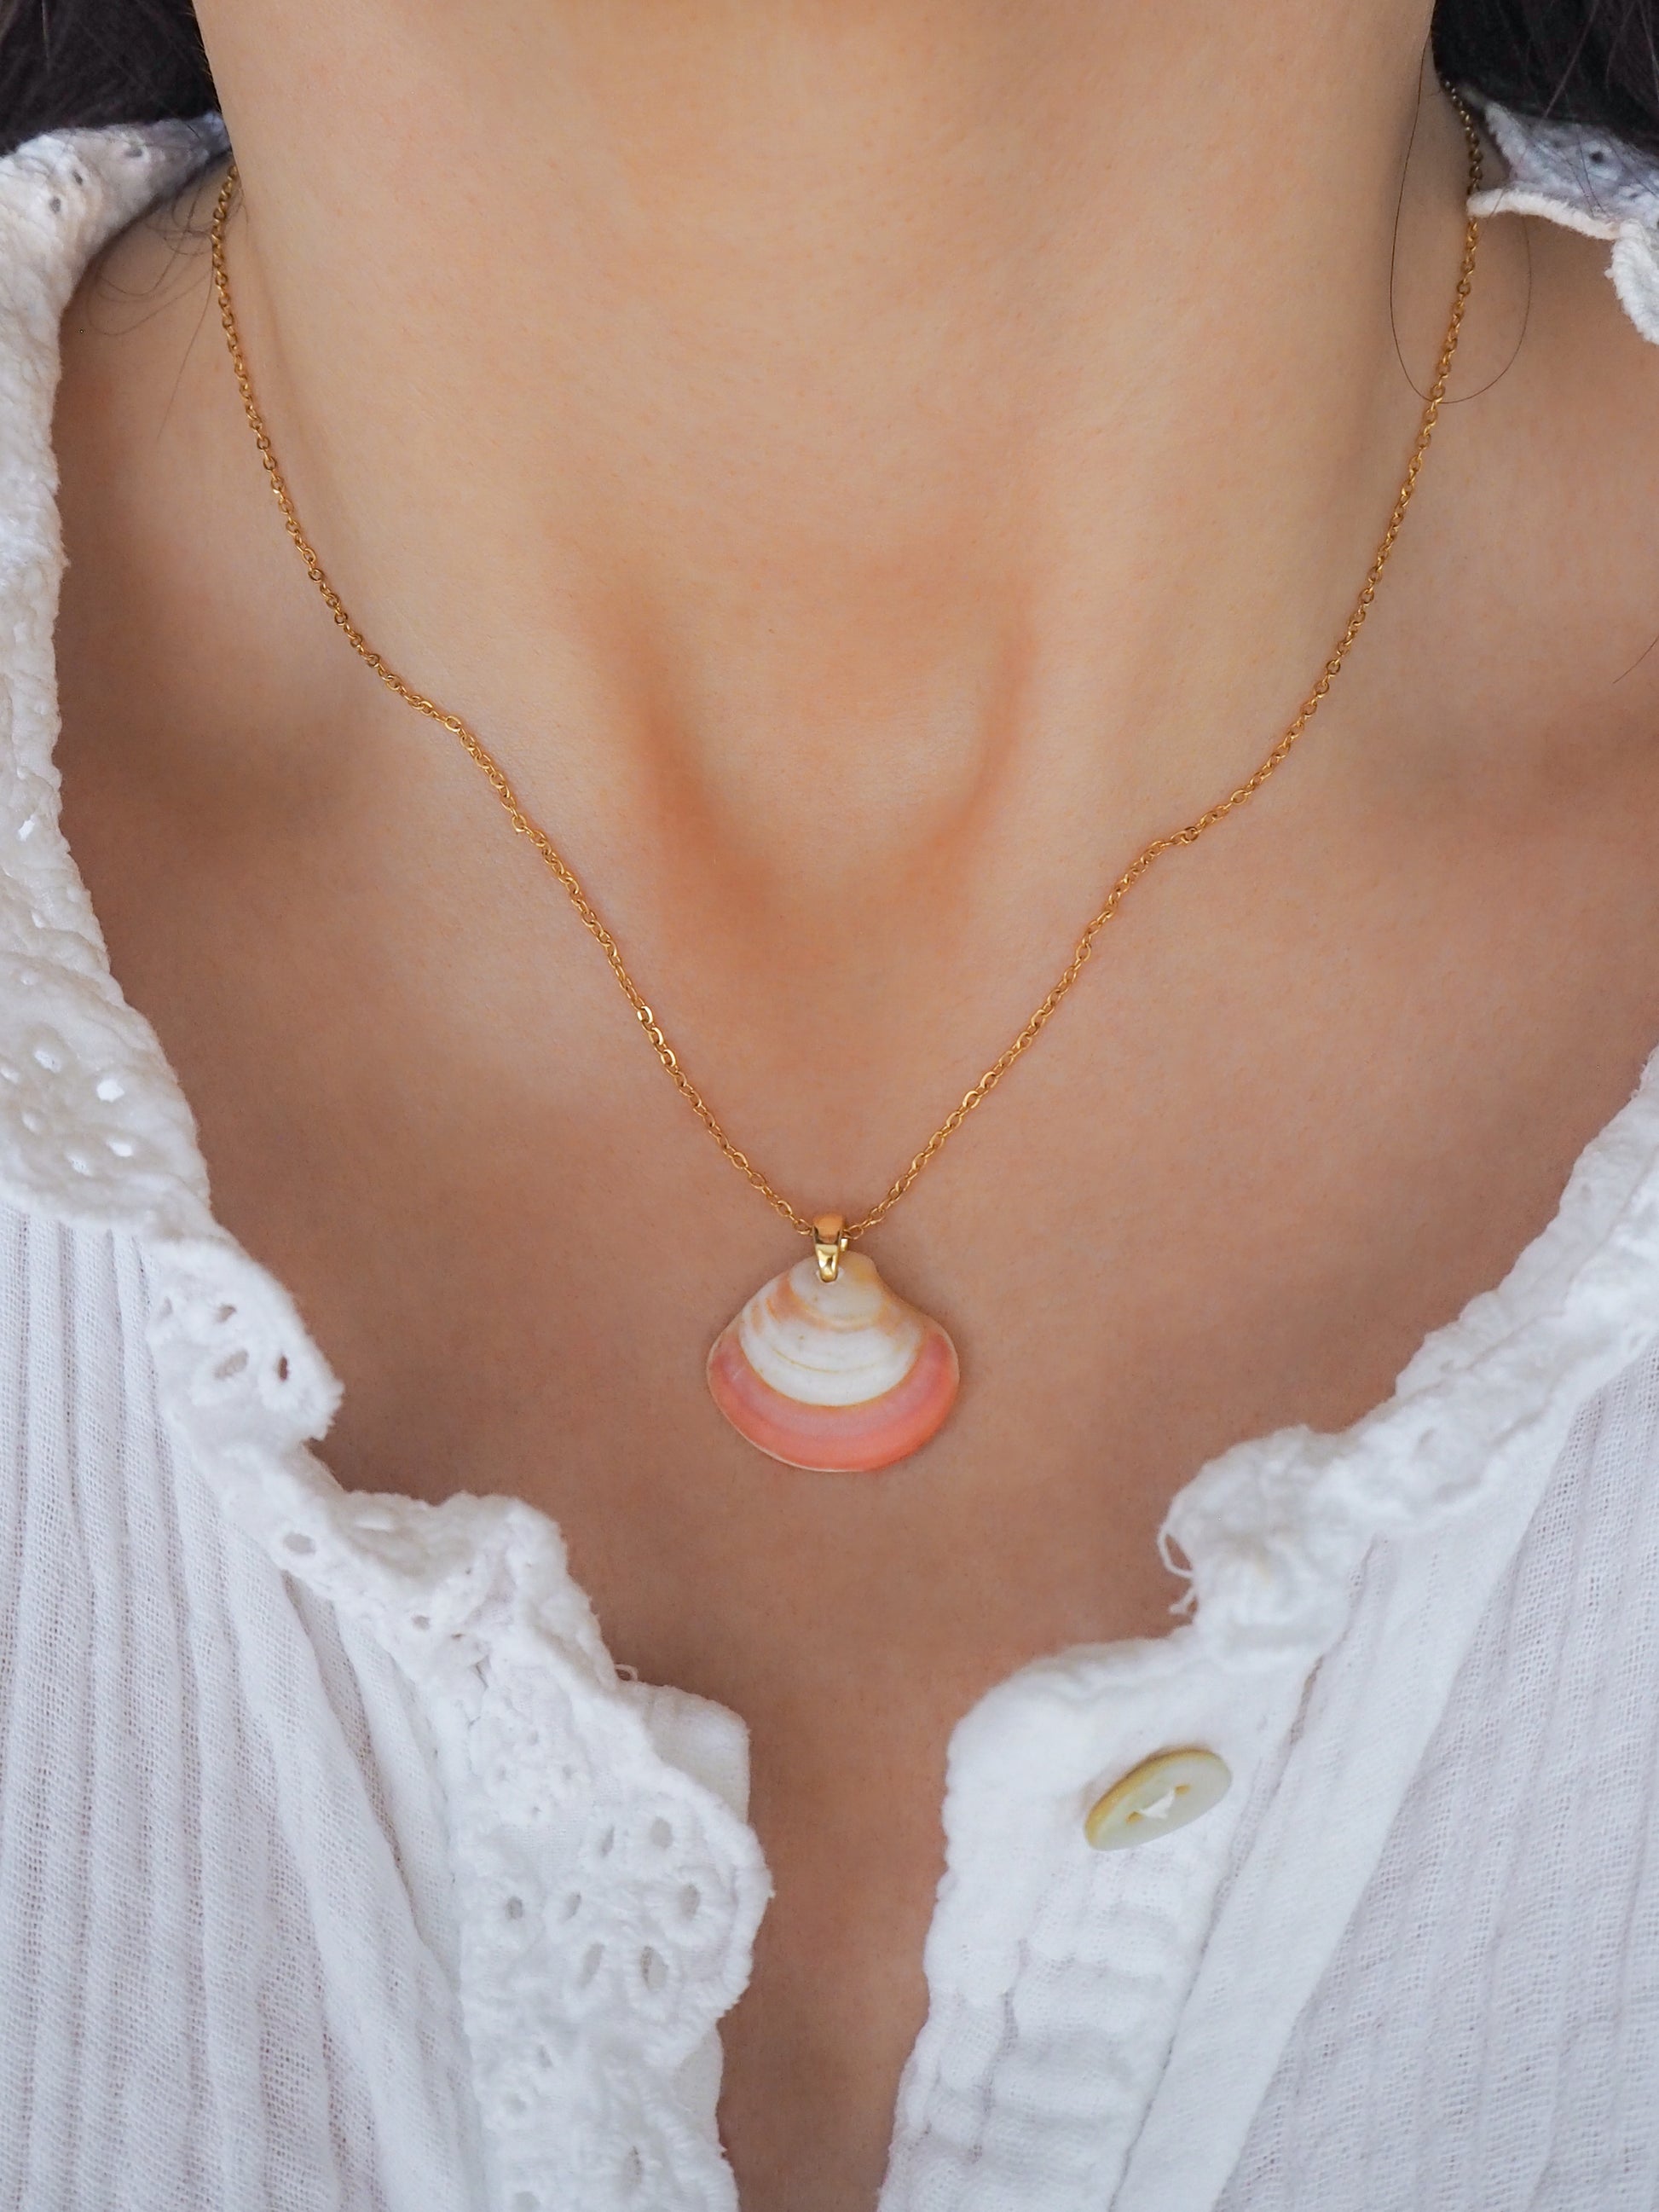 Pink White Venus Shell Gold Necklace on model, Real Shell Jewelry, Sea by Lou, seabylou, Beach Girl Jewelry